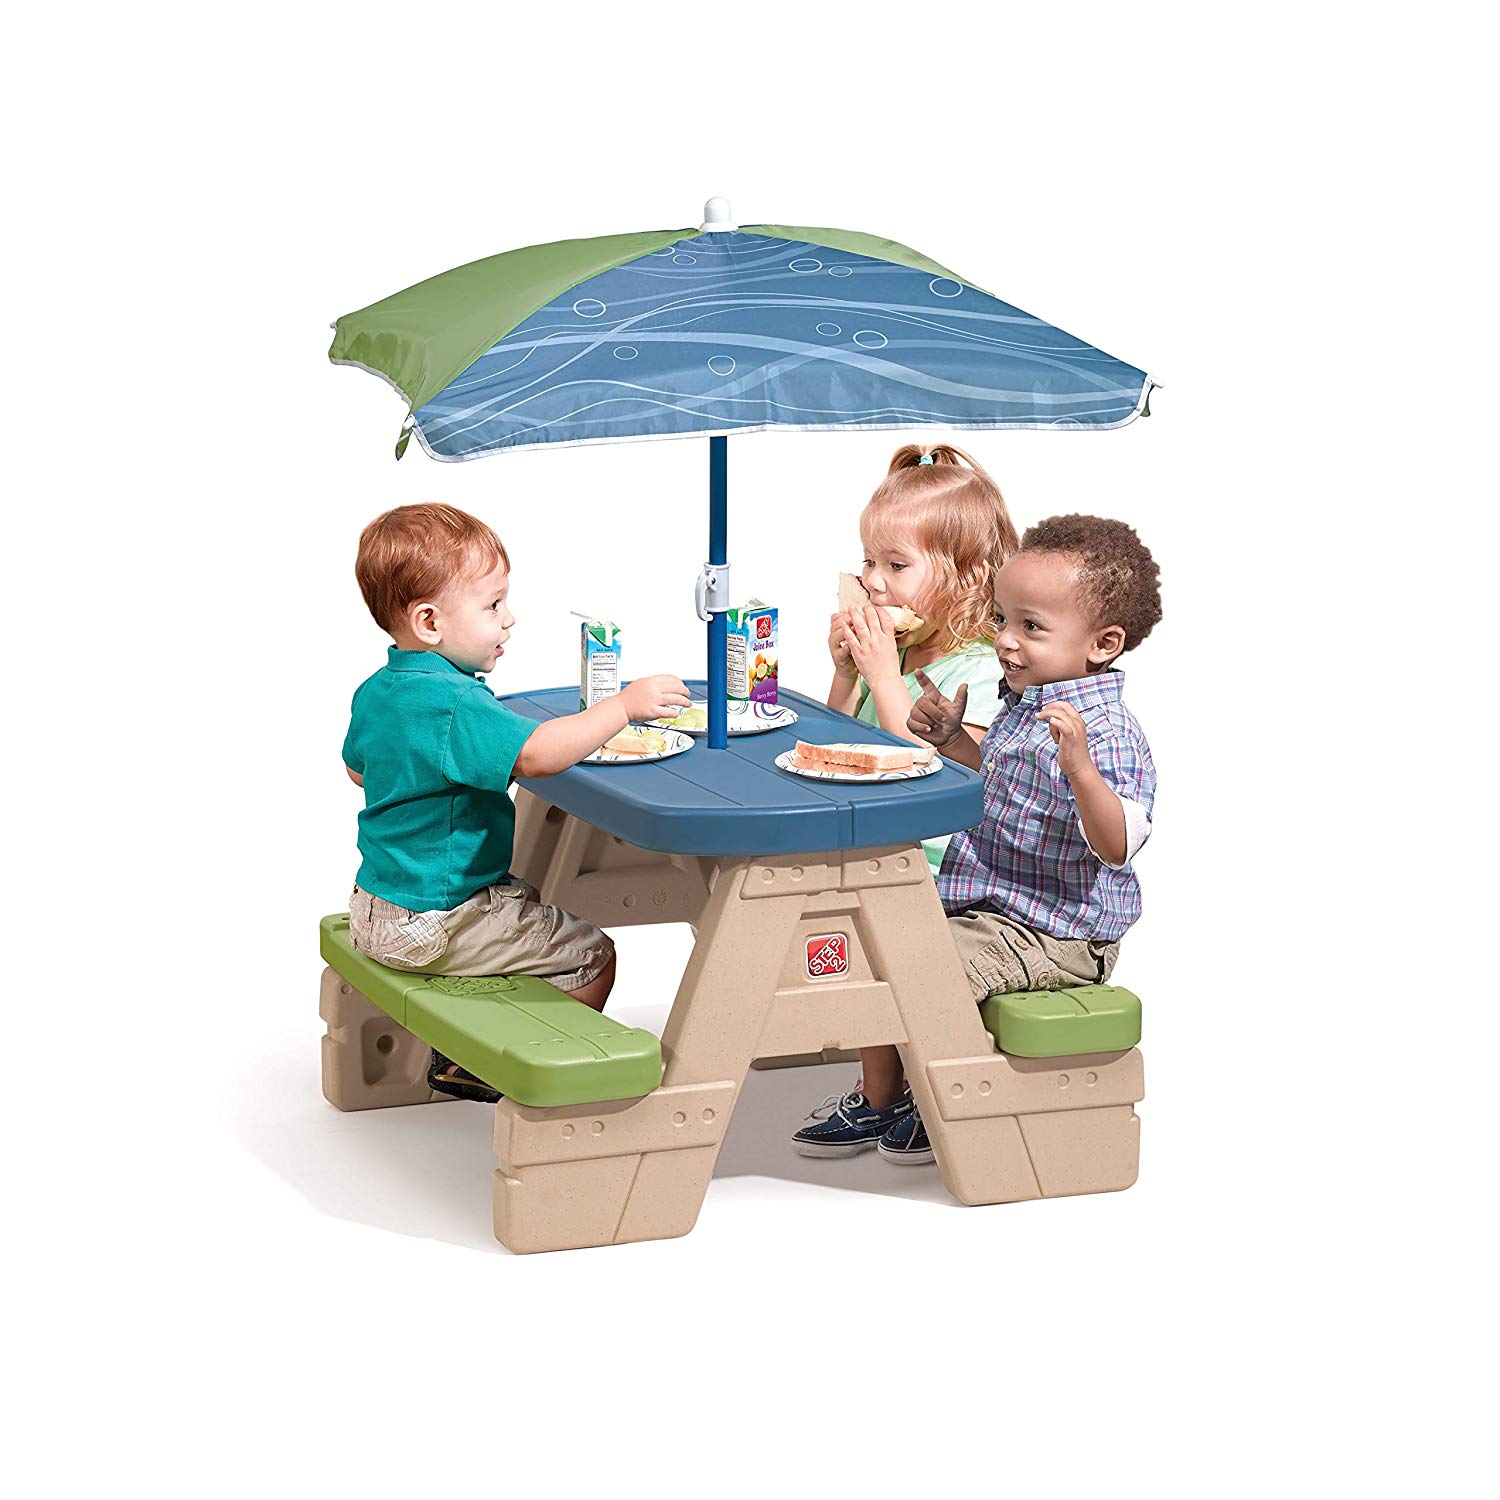 Step2 Sit and Play Junior Picnic Table with Umbrella, Plastic - image 3 of 3